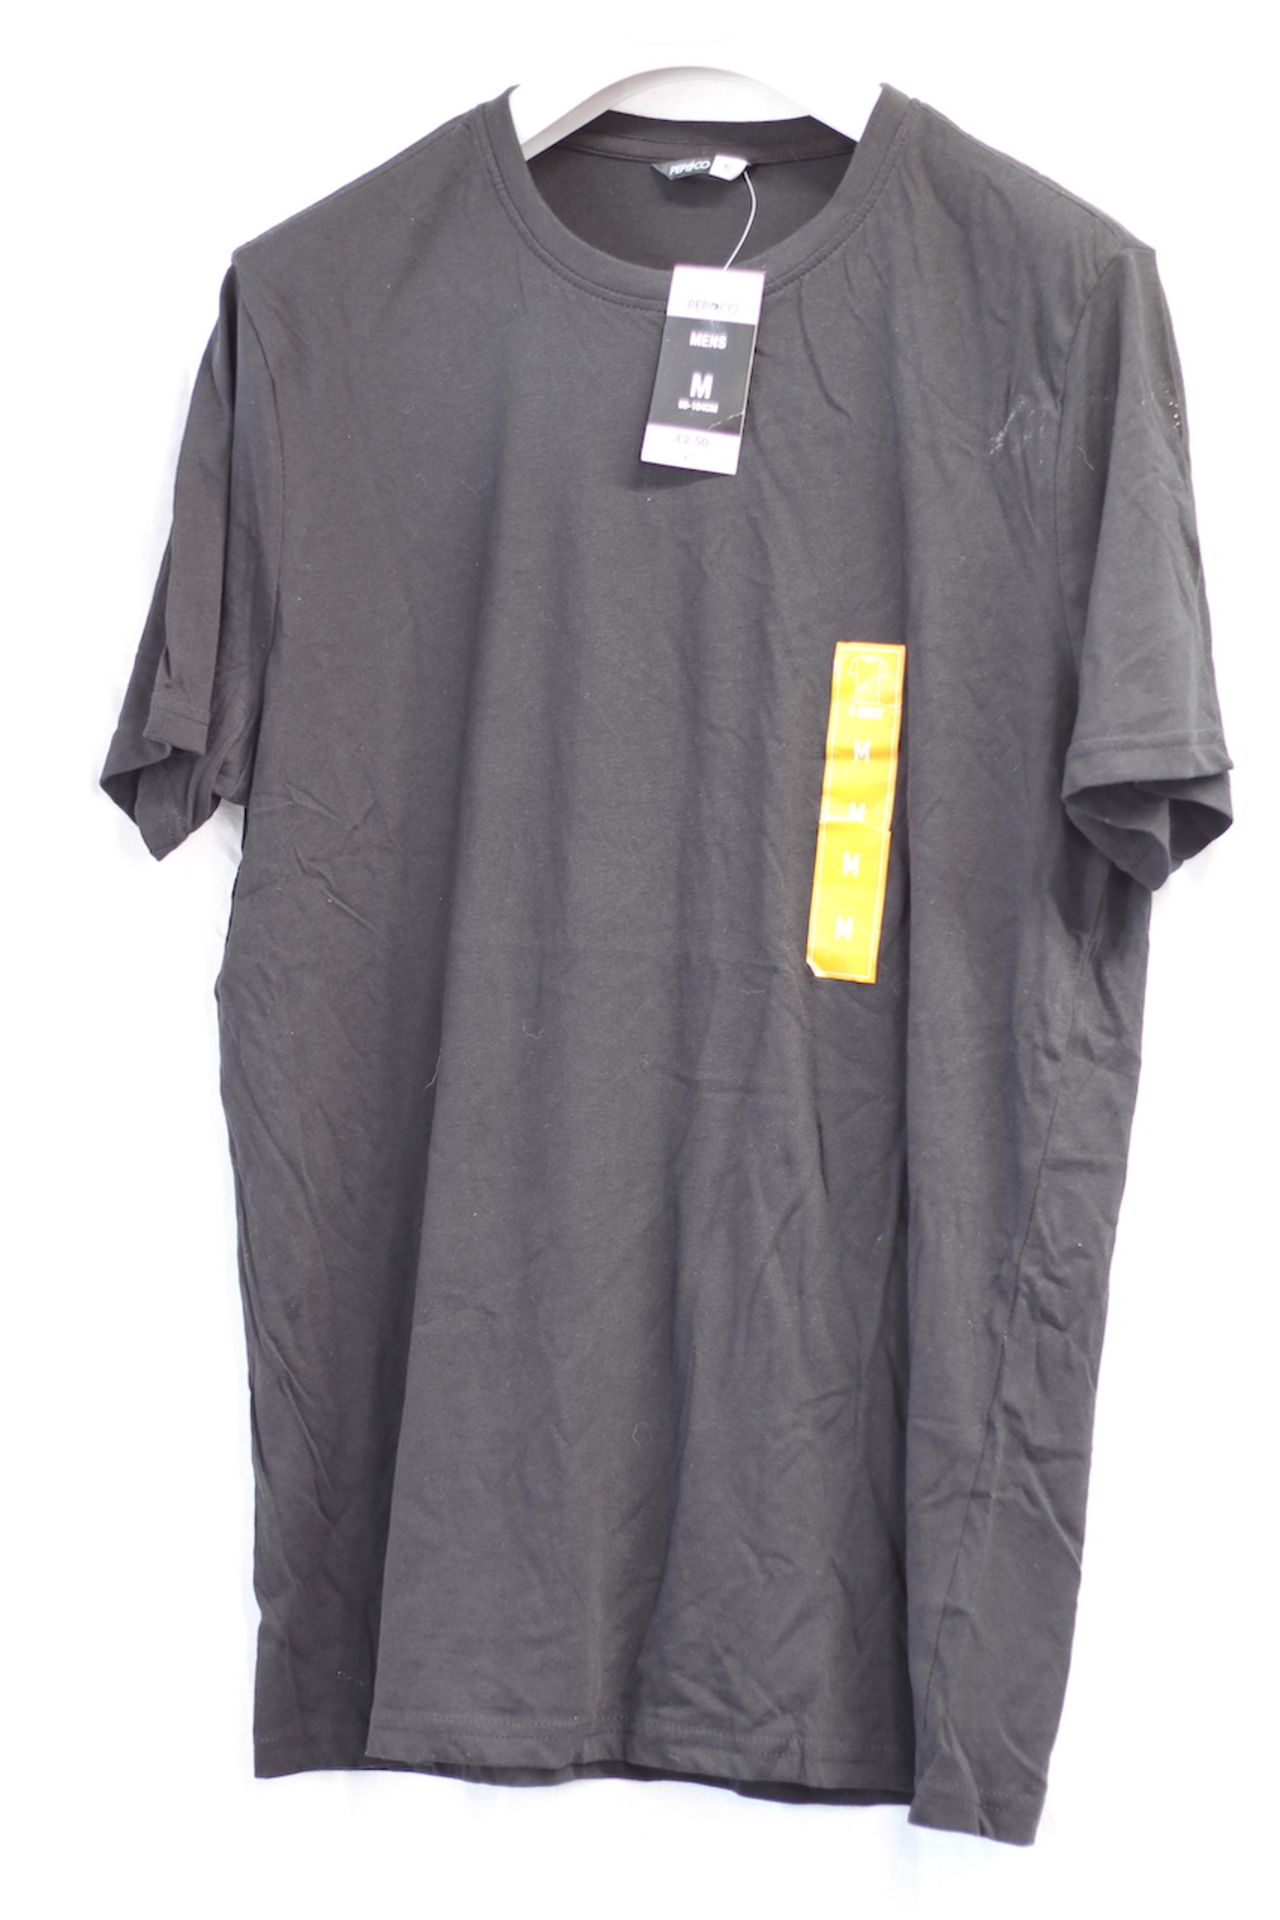 PEPCO MENS T-SHIRT NEW WITH LABELS, Colour : BLACK, AGE: UNKNOWN, SIZE: MEDIUM, CONDITION GRADE: 1